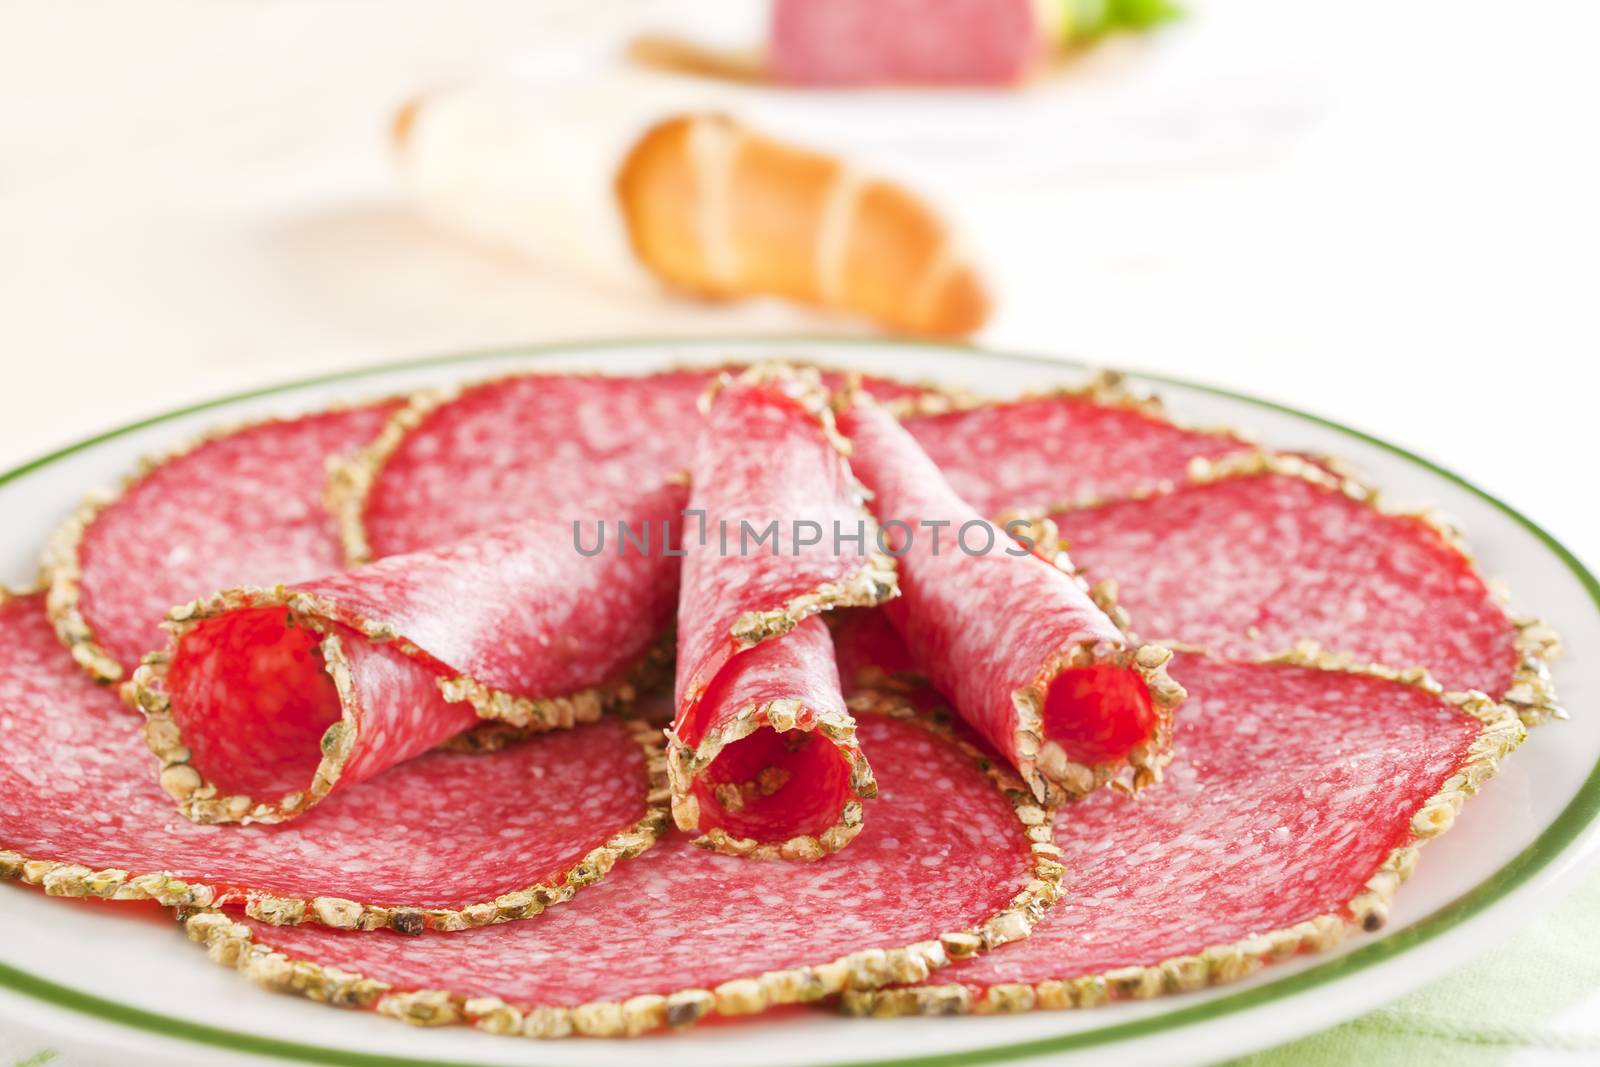 Delicious salami slices arranged on plate. Pastry in background. Culinary meat concept.